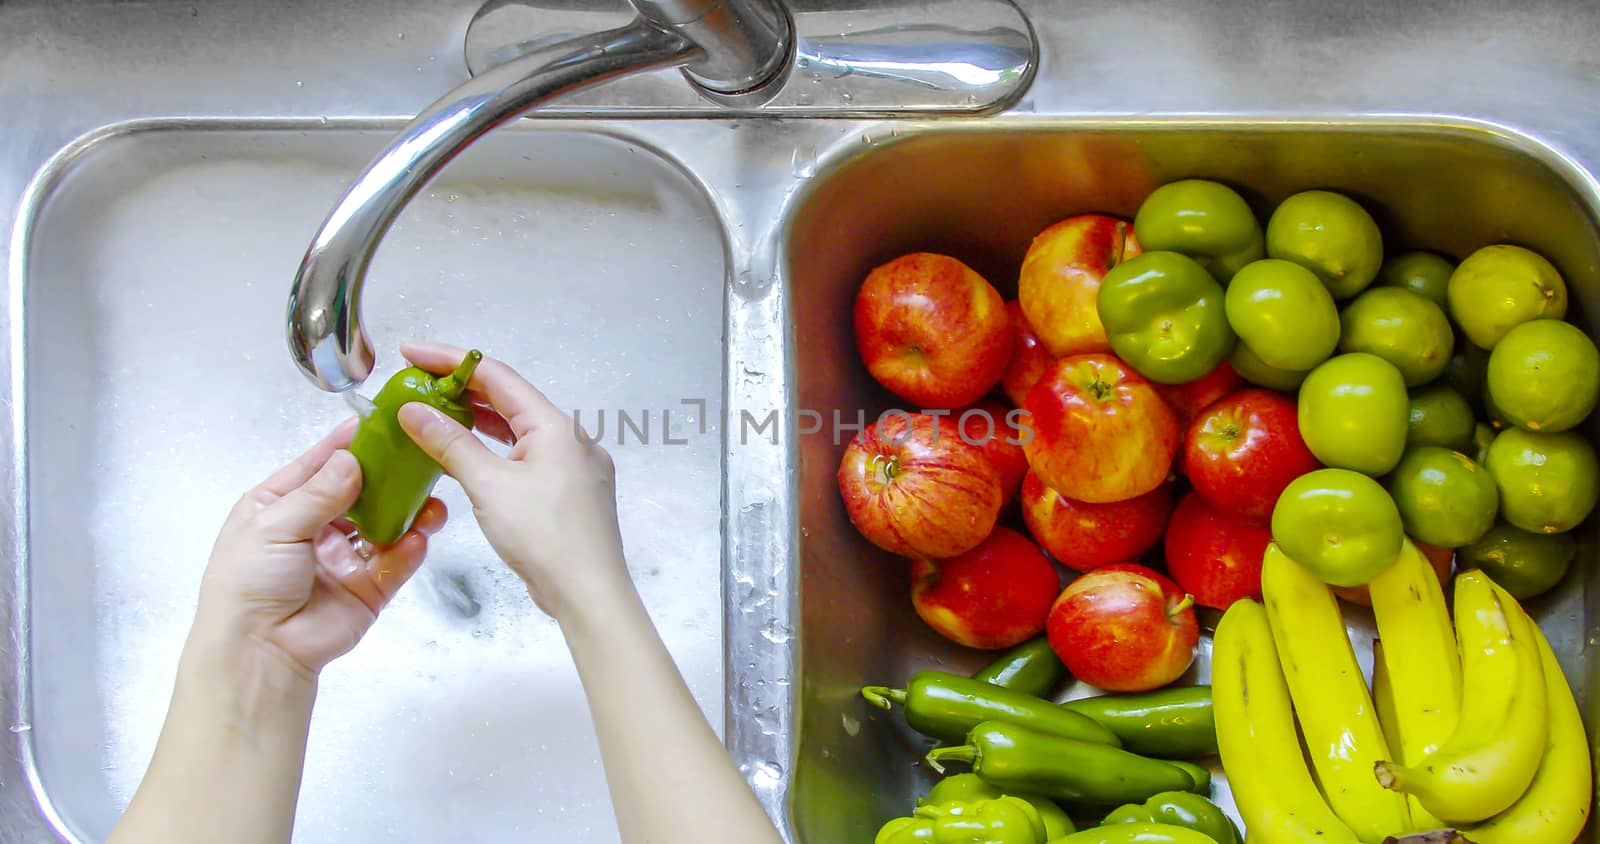 Washing vegetables and fruits on a sing with running water and soap